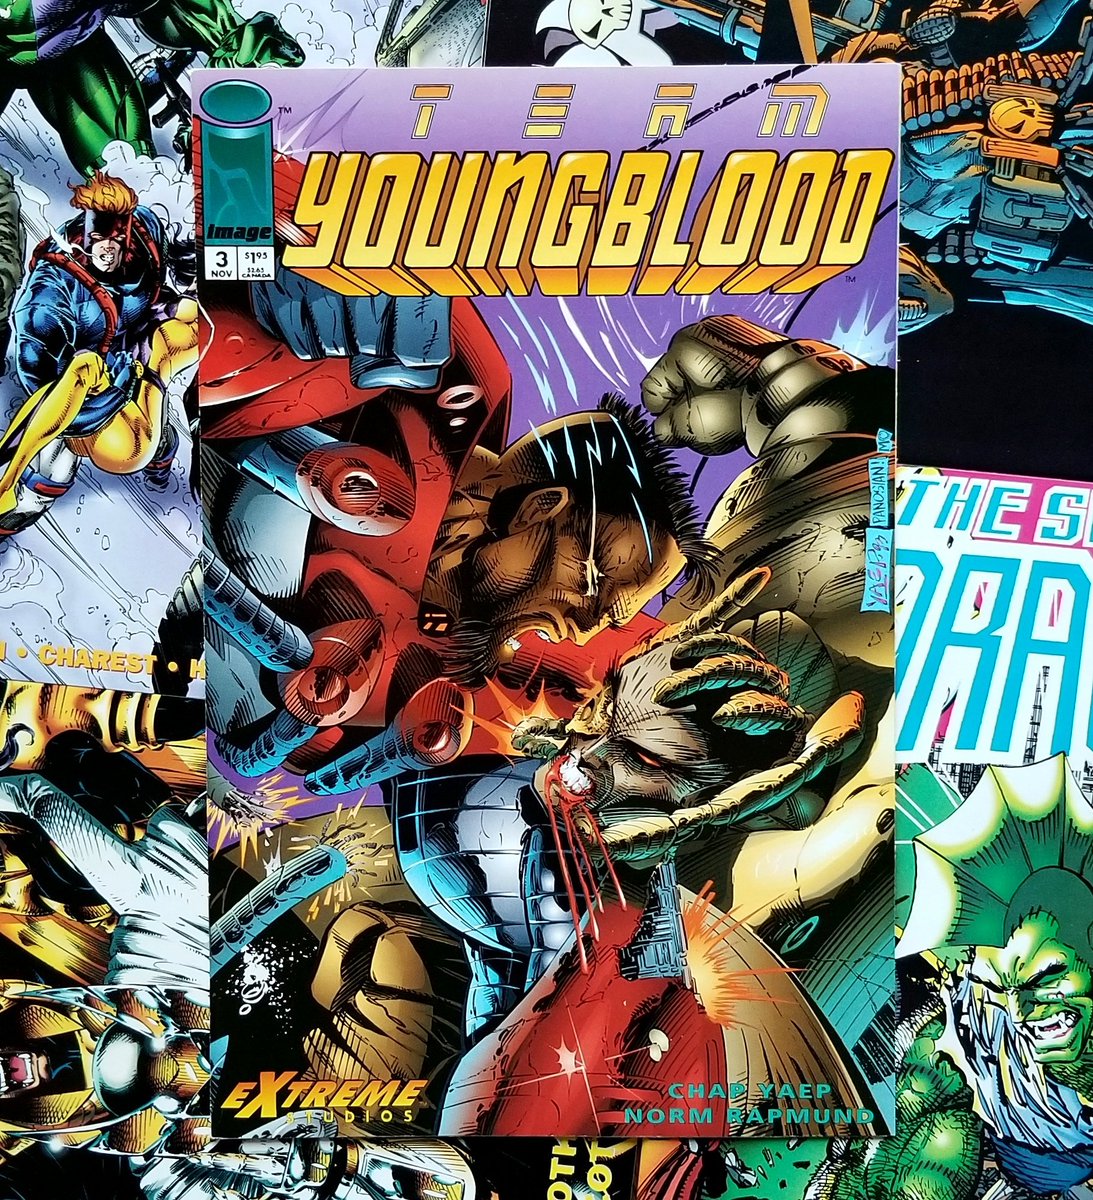 Team Youngblood #3 (1993) #TeamYoungblood #ImageComics #90s #Sentinel #Giger #RobLiefeld #ChapYaep